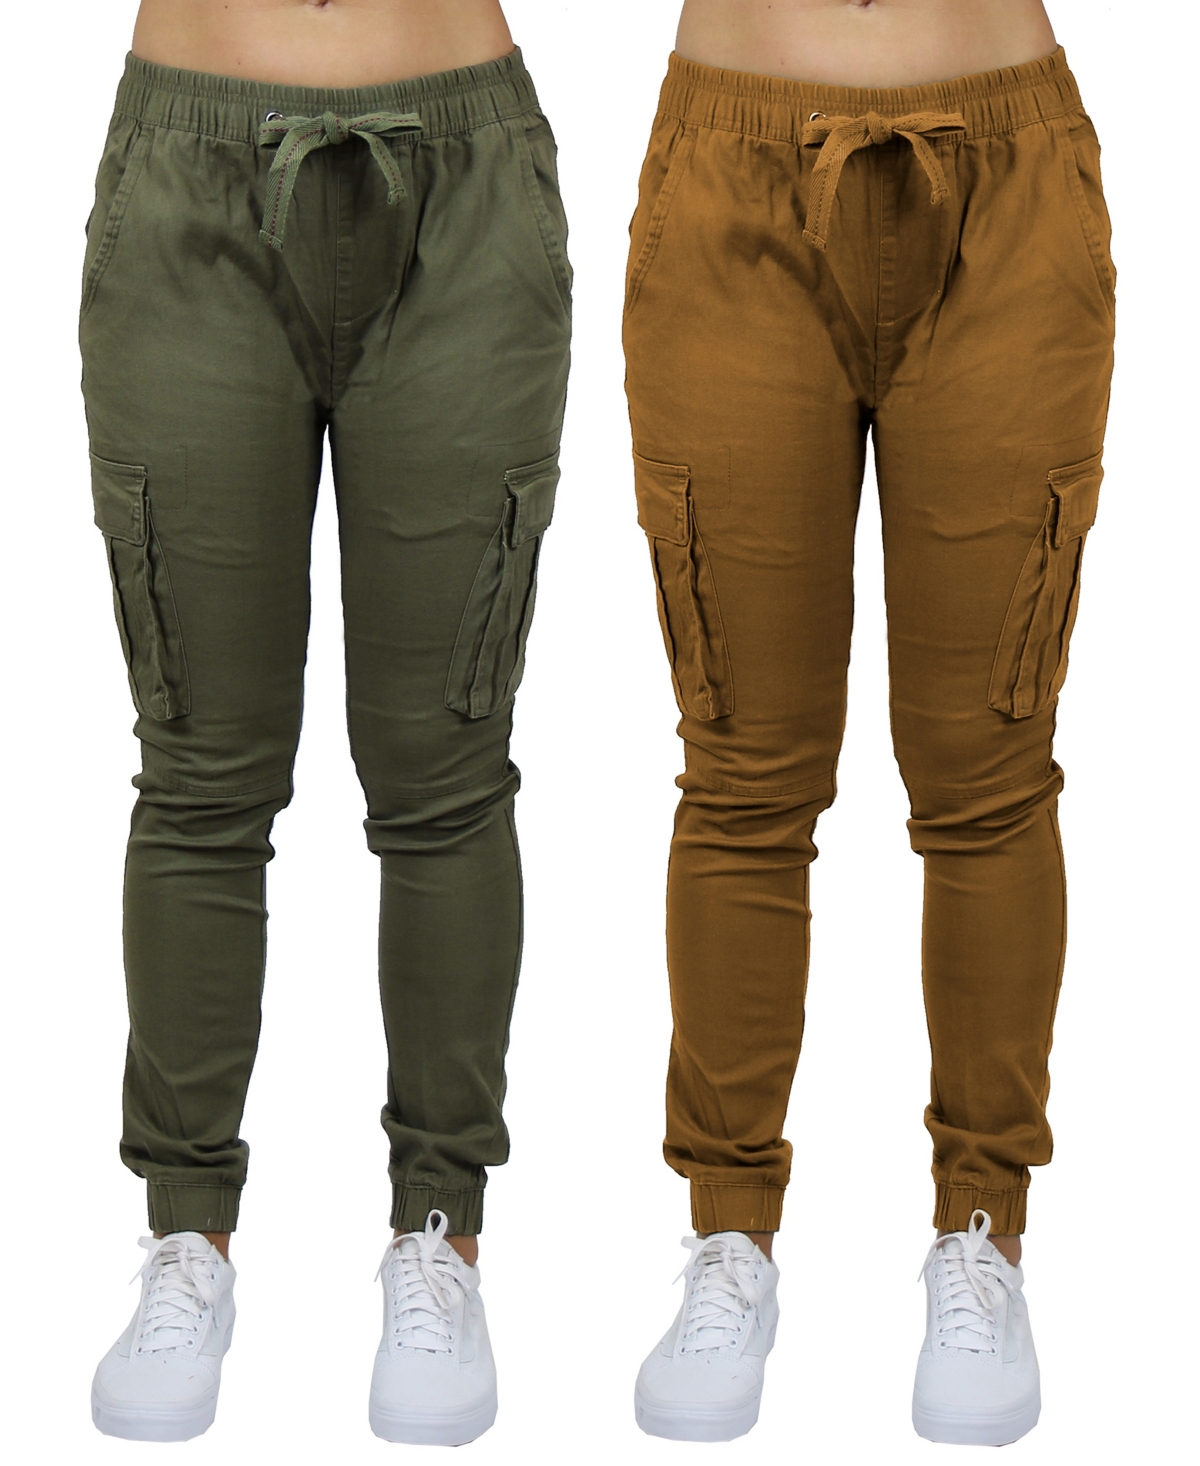 Women's Loose Fit Cotton Stretch Twill Cargo Joggers Set, 2 Pack - Navy, Woodland